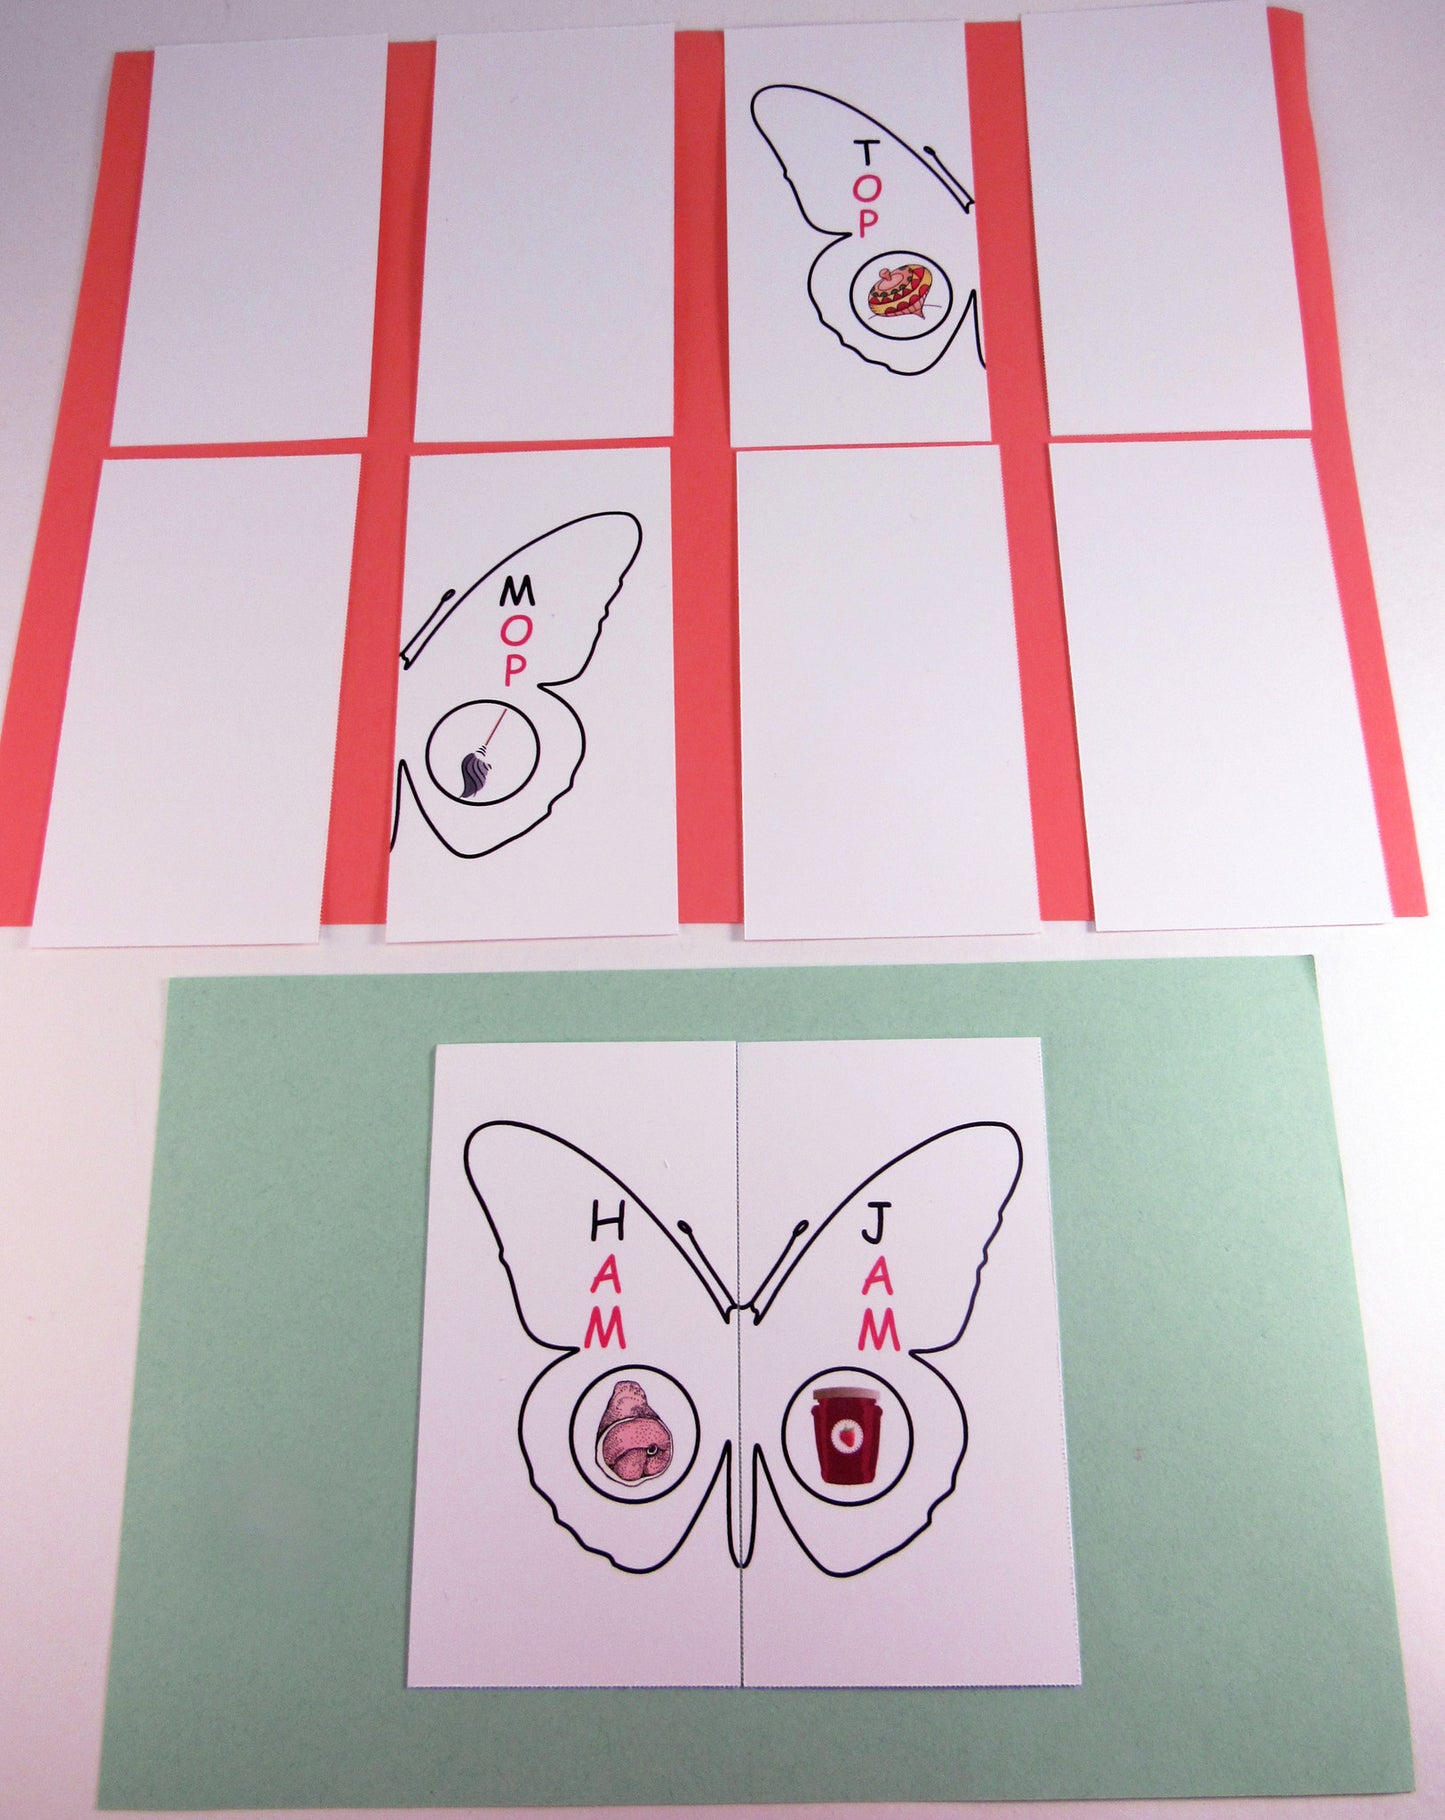 Butterfly Rhyming Game - Ivy Kids Educational Activity Kit featuring the book Gotta Go! Gotta Go! by Sam Swope and over 10 art, literacy, math, and science activities inspired by the story. Learn about monarch butterflies. Perfect kit for spring.